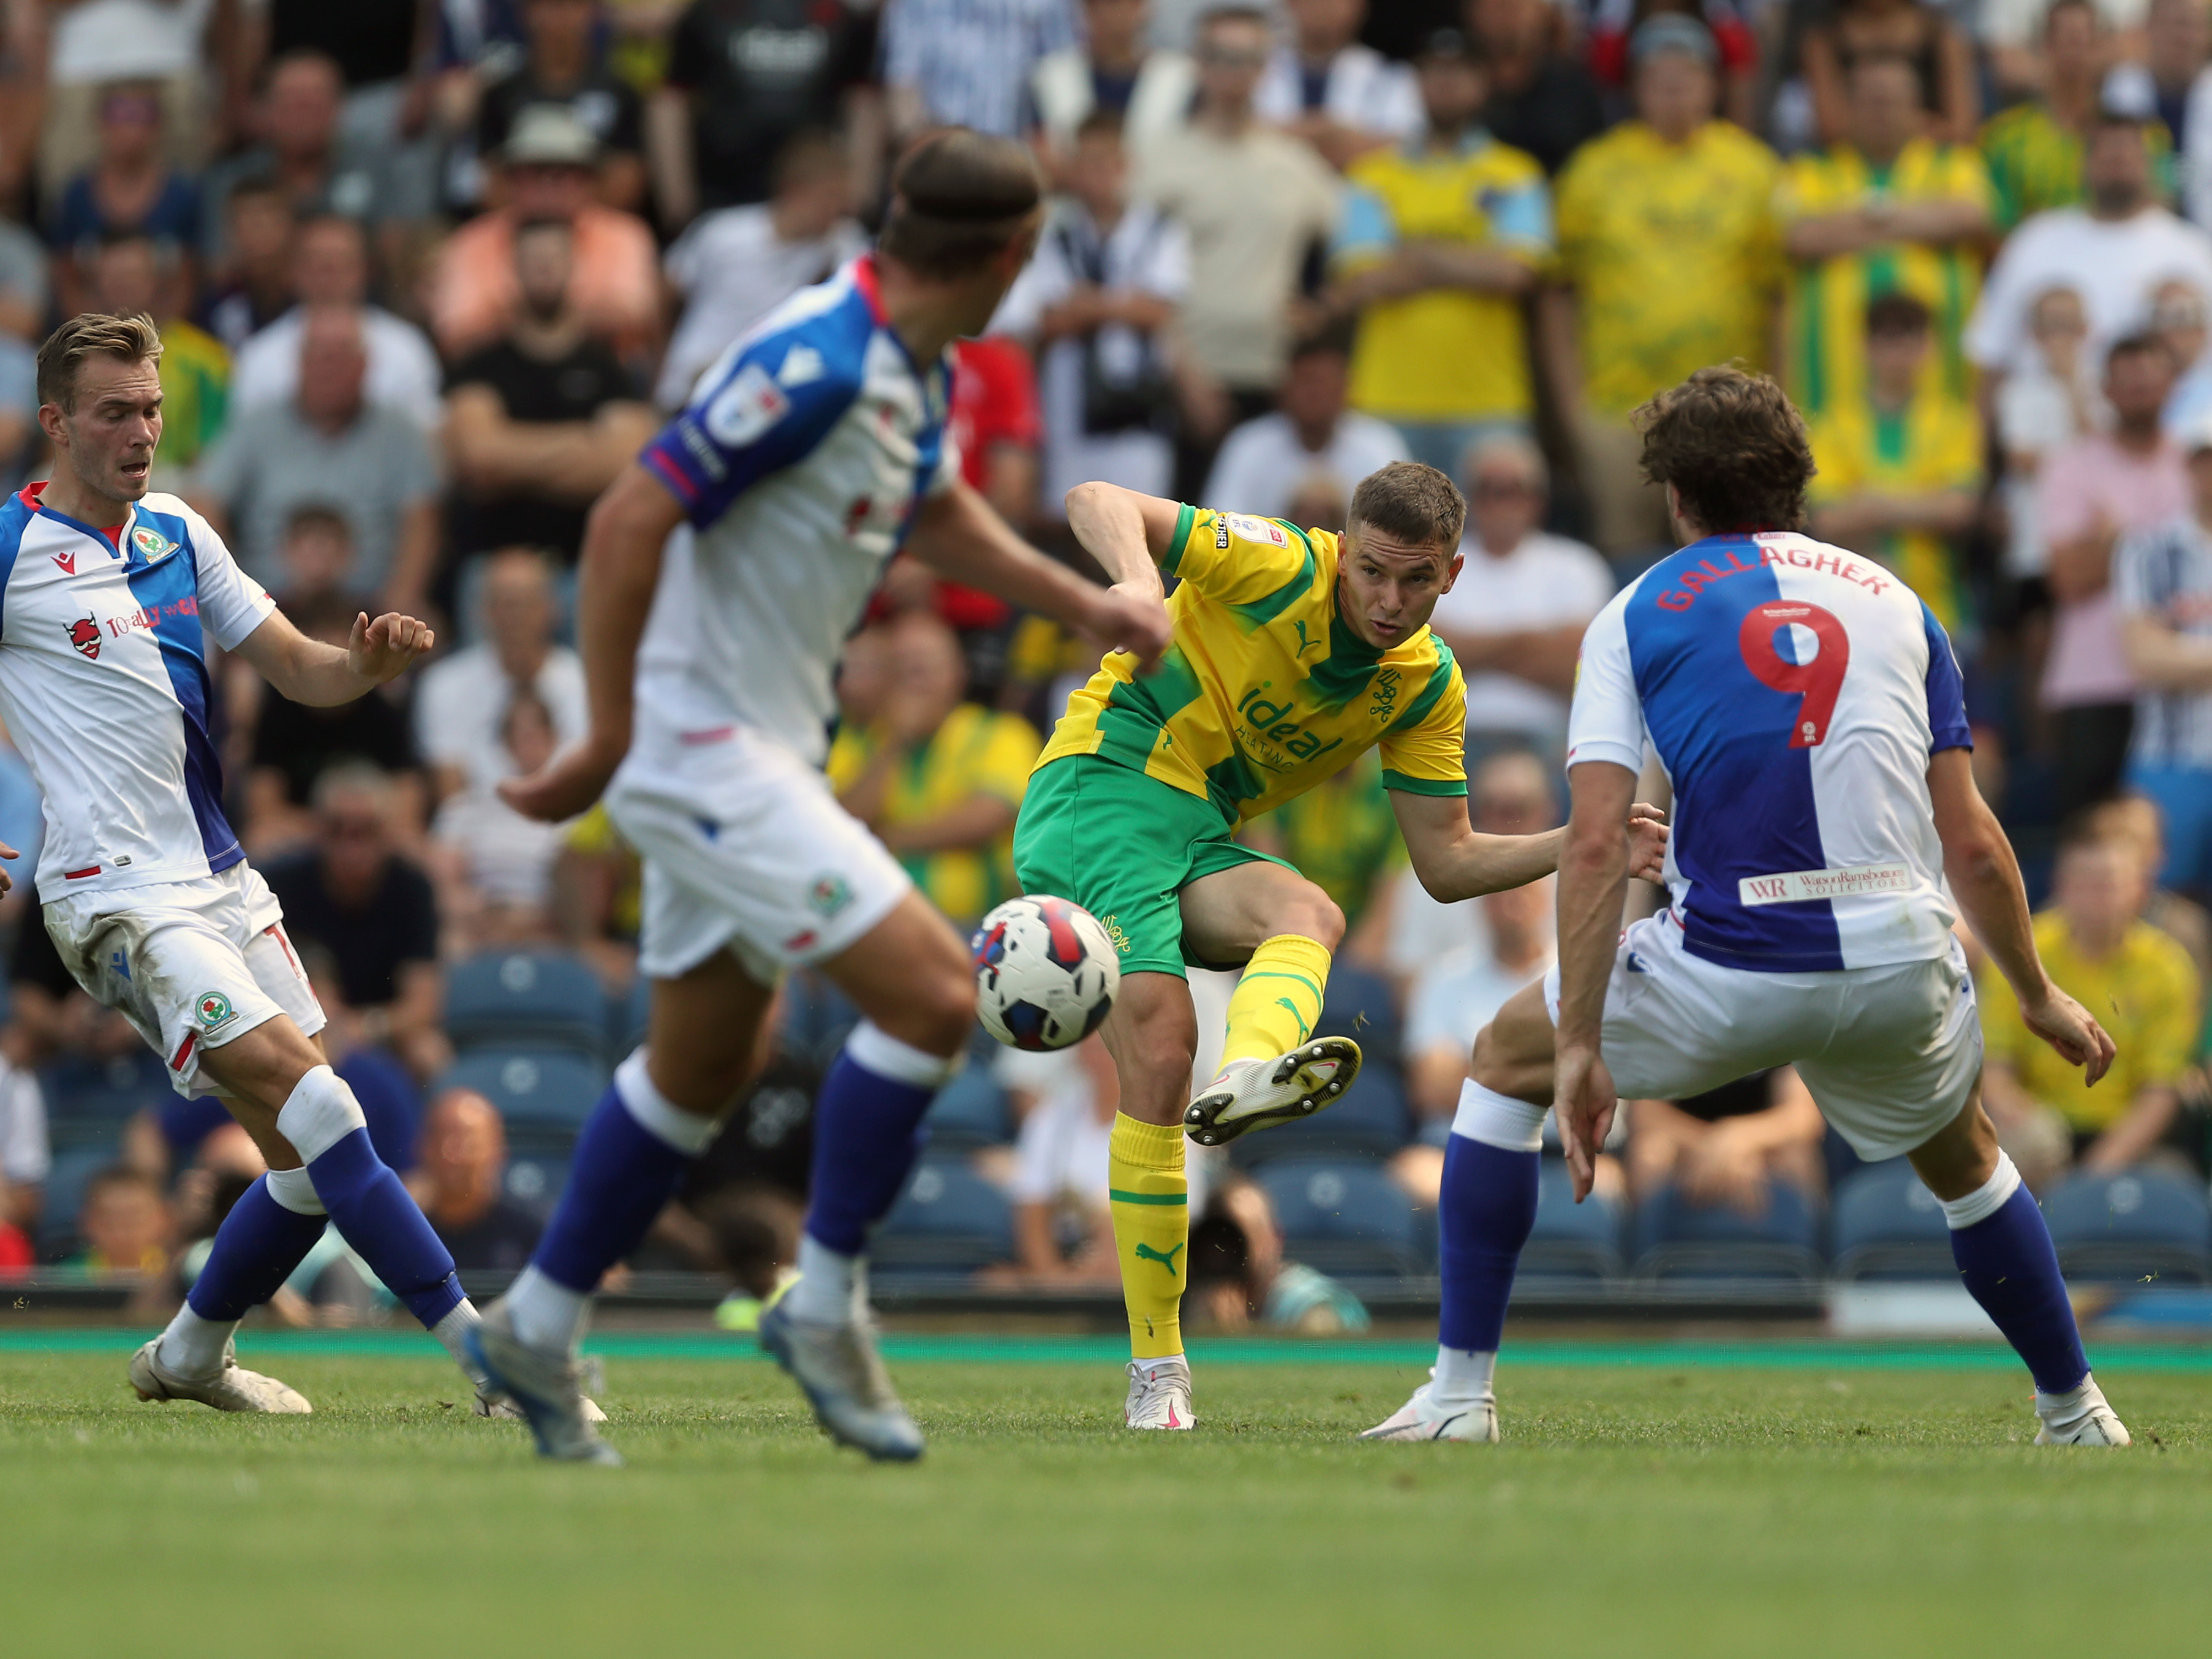 Townsend in action at Blackburn